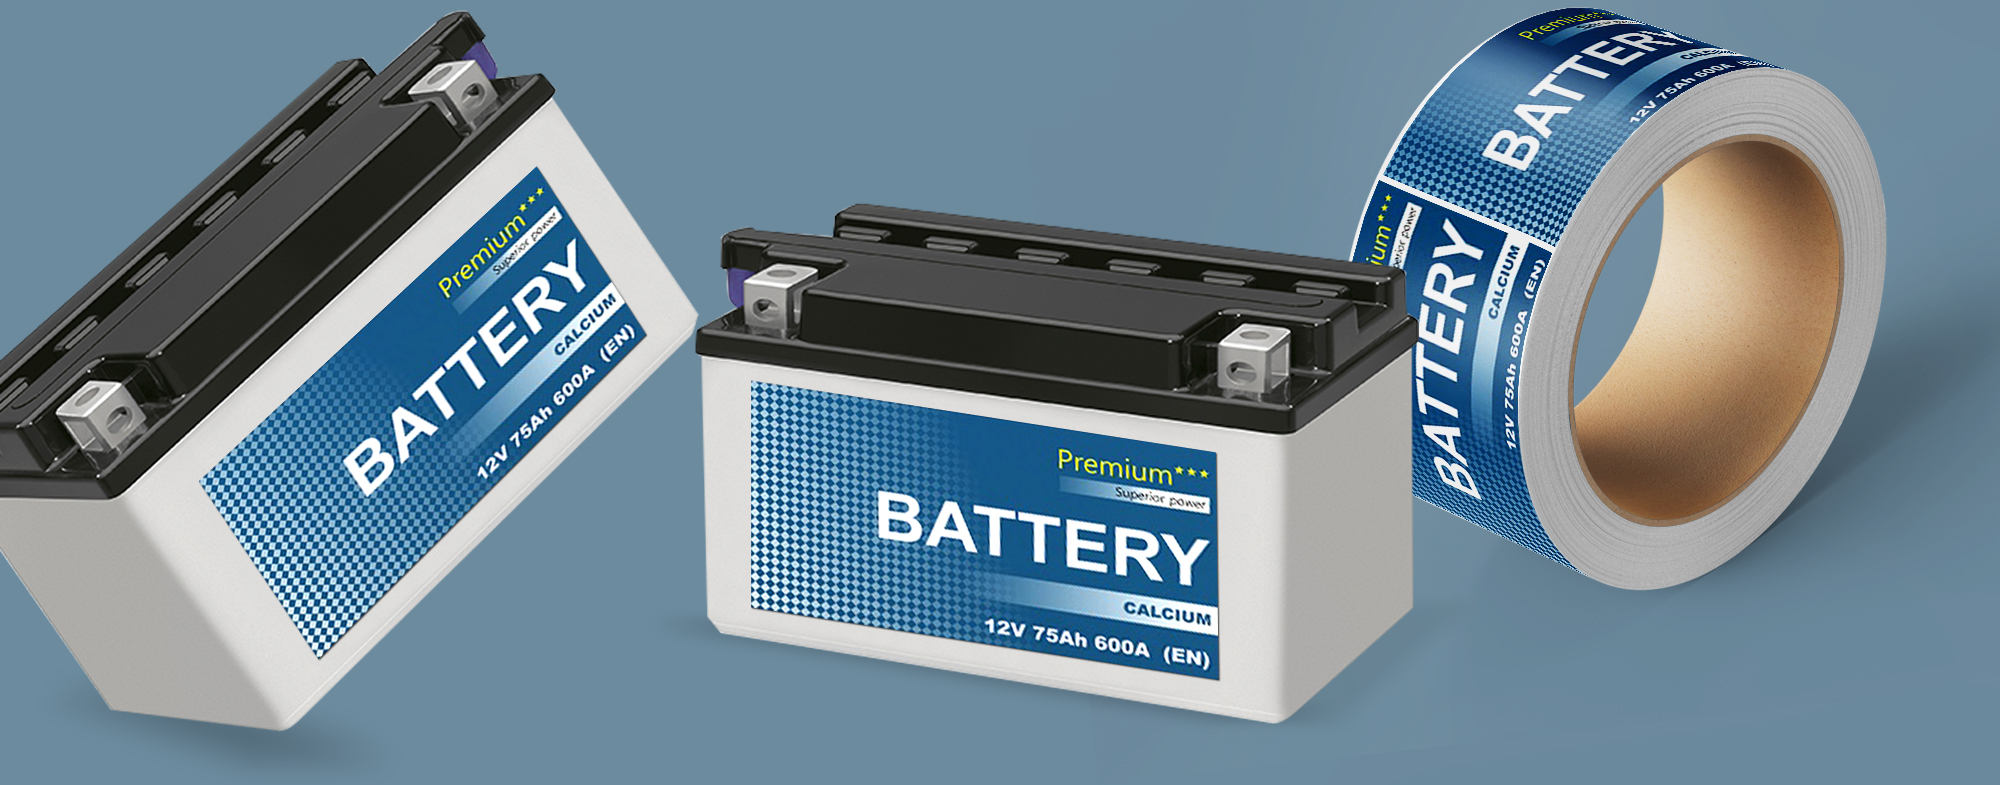 Battery stickers & battery labels that withstand stringent testing.